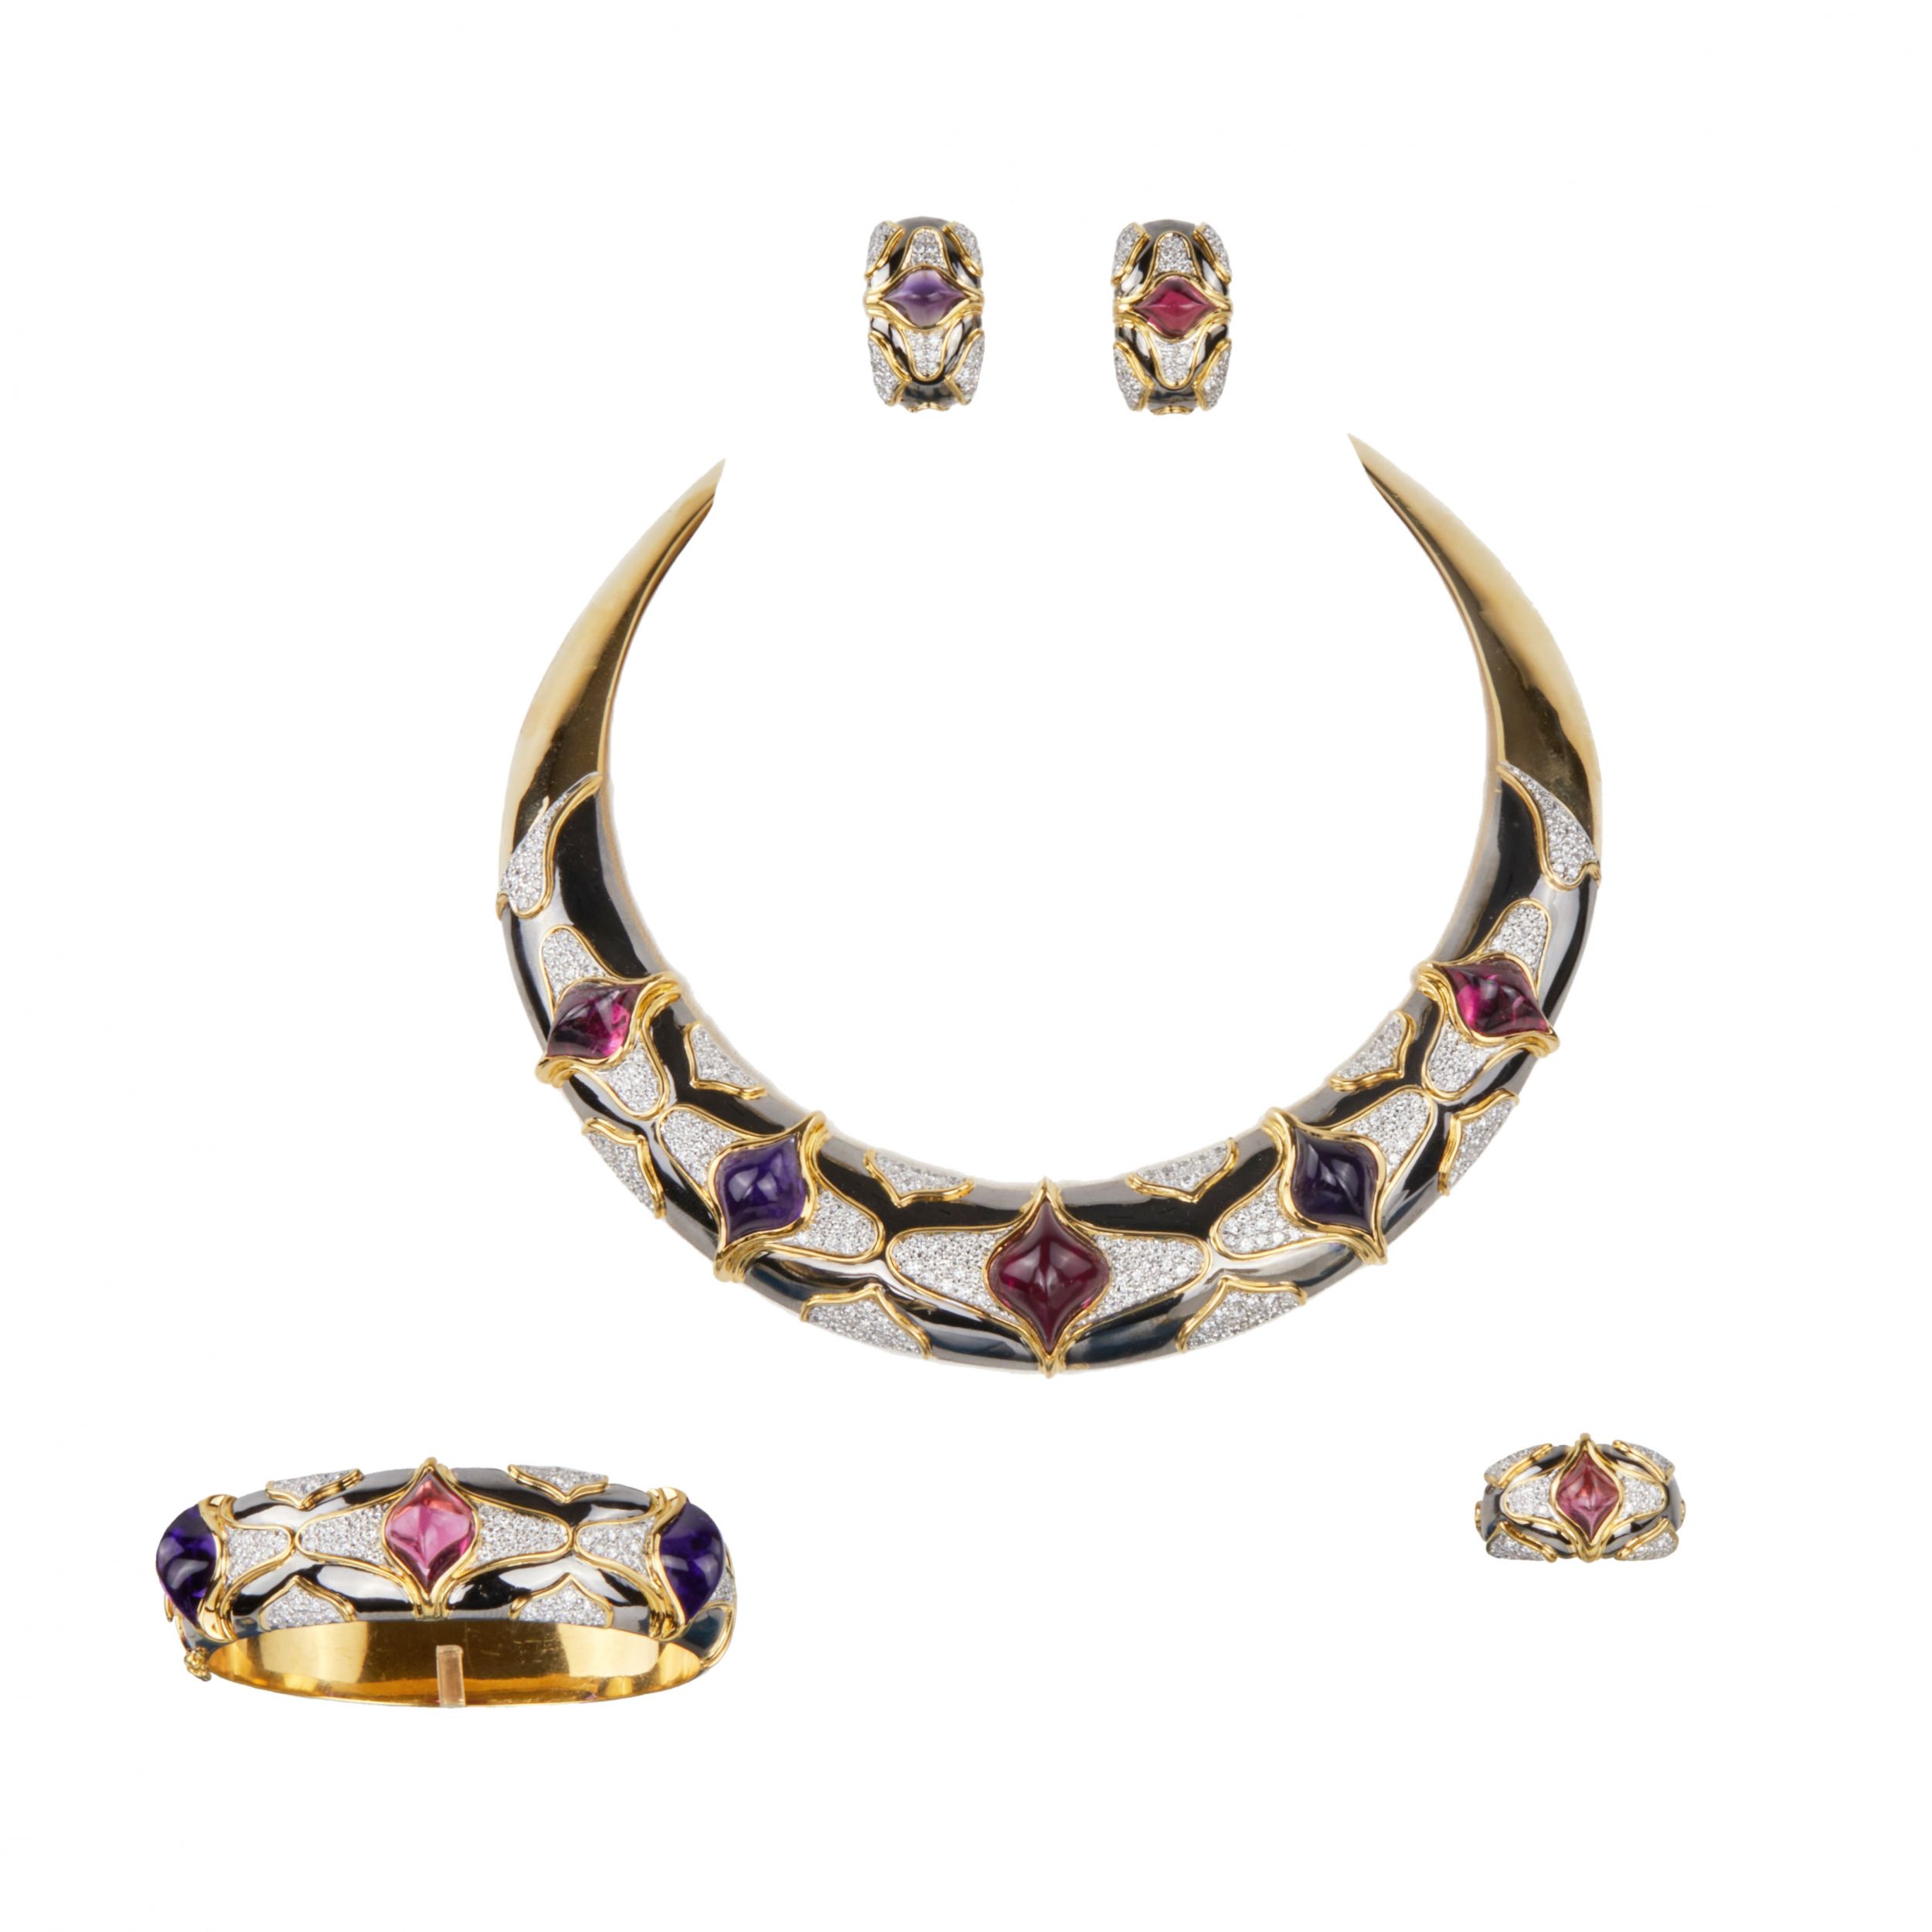 Impressive-gold-jewelry-set-with-amethysts-and-diamonds-